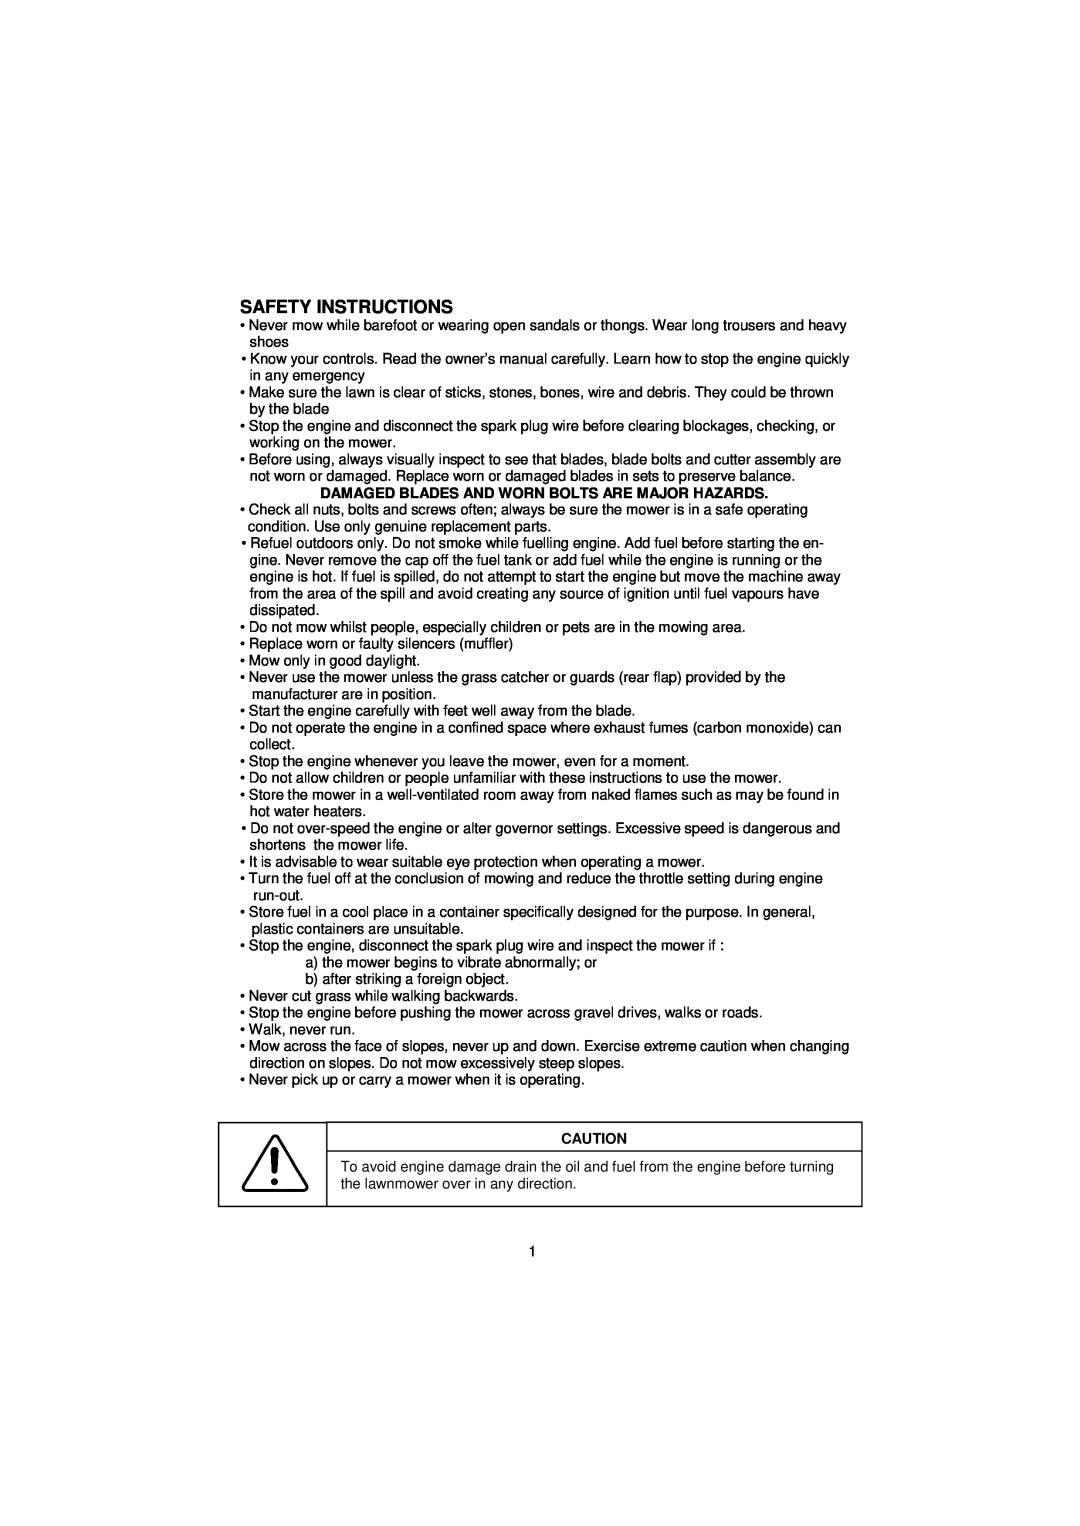 Rover Domestic Rotary Lawnmower owner manual Safety Instructions, Damaged Blades And Worn Bolts Are Major Hazards 